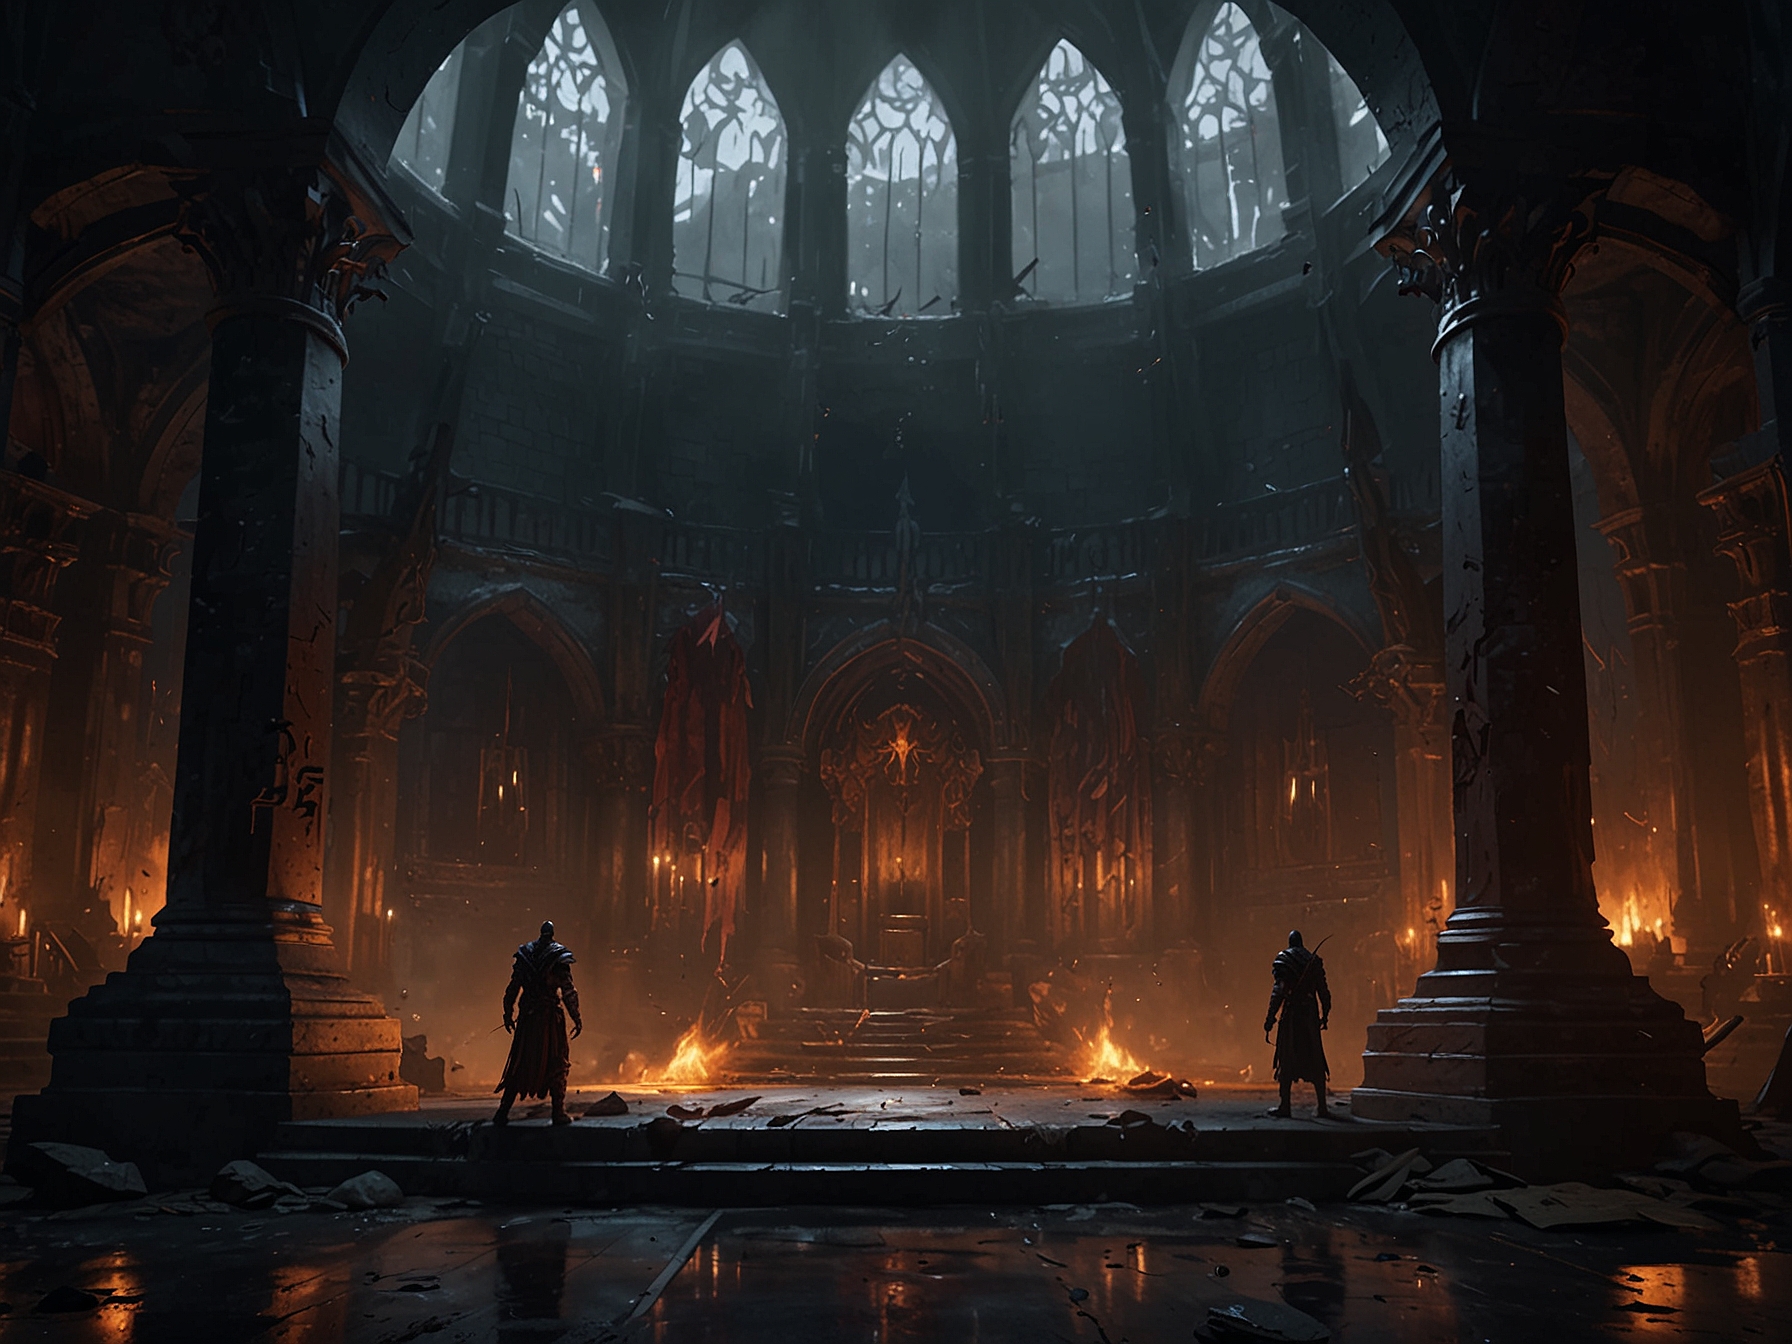 Concept art depicting the dark and immersive world that players might expect in Lords of the Fallen 2.